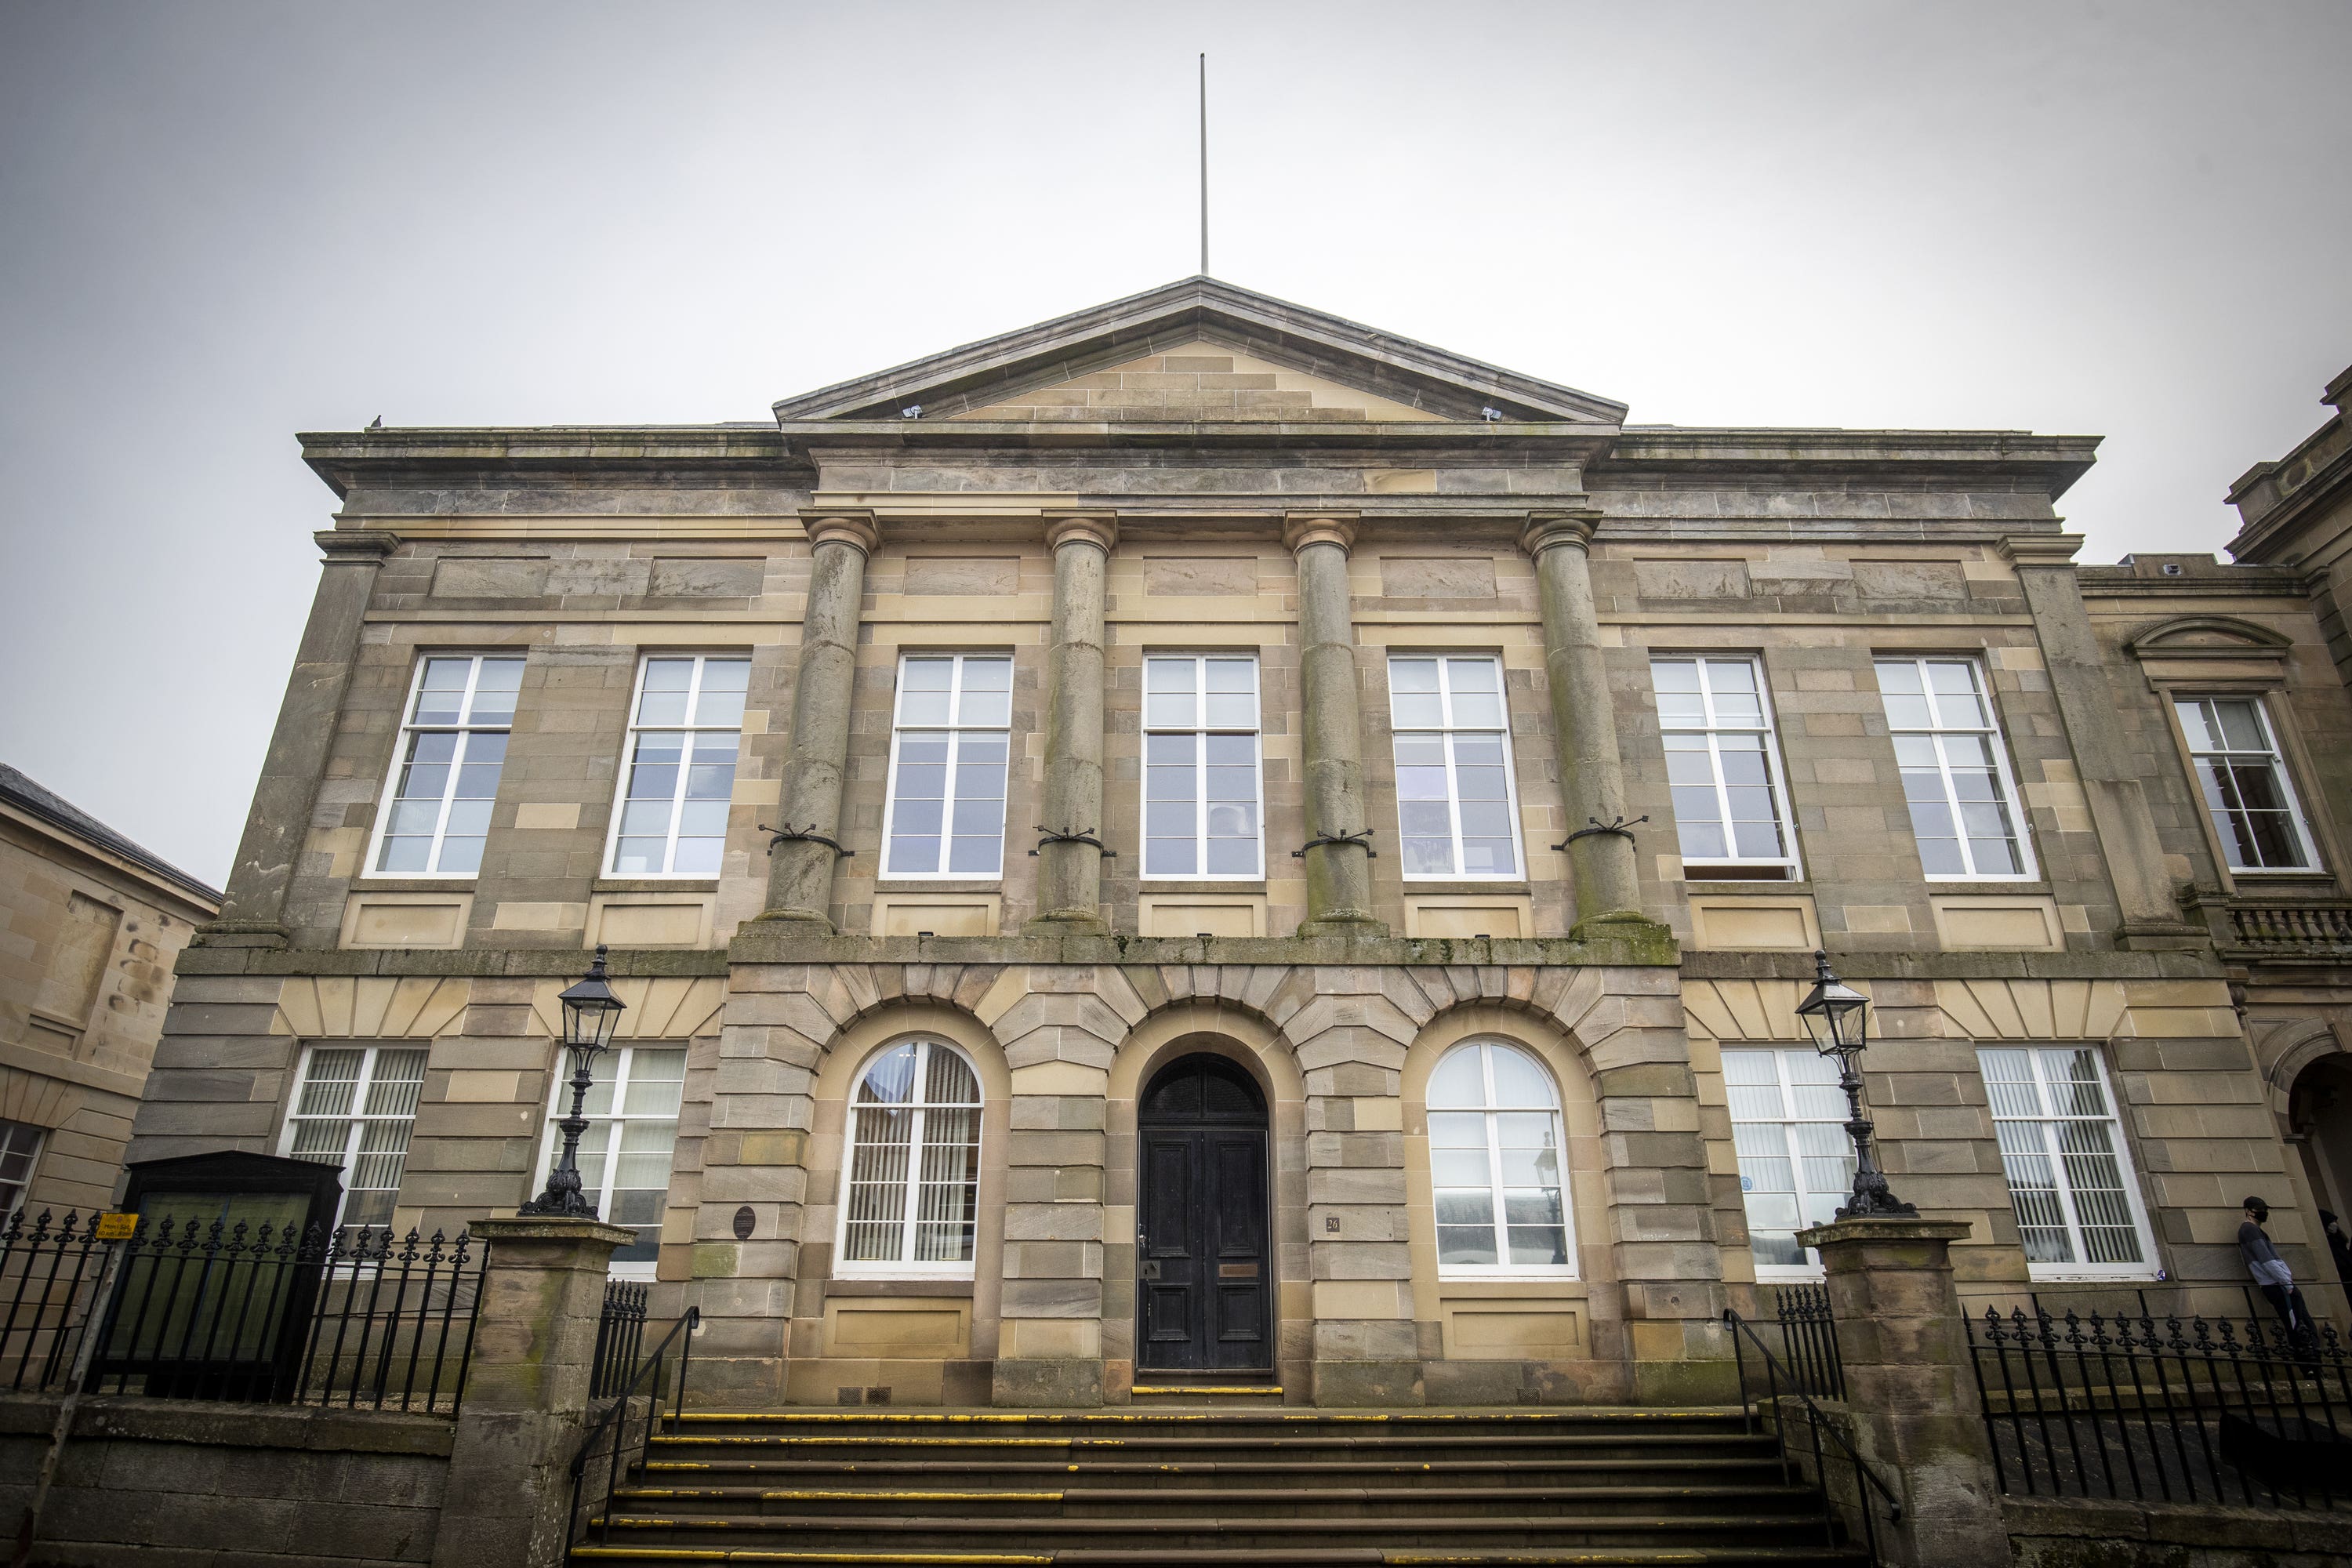 <em>The case was heard at Lanark Sheriff Court (Jane Barlow/PA)</em>”/><cite class=cite>PA Wire</cite></div><figcaption aria-hidden=true><em>The case was heard at Lanark Sheriff Court (Jane Barlow/PA)</em> <cite class=hidden>PA Wire</cite></figcaption></figure><p>The court charge states: “On February 3 2021 at Waverly Court, Lanark, you Joseph Kelly did cause to be sent by means of a public electronic communications network a post to the public using social media that was grossly offensive or of an indecent, obscene or menacing character, and that did utter offensive remarks about Captain Sir Tom Moore, now deceased.”</p><p>Sheriff Nikola Stewart set an intermediate appearance for Wednesday May 19 before a trial date of Thursday June 17.</p><p>Sir Tom, who captured the hearts of the nation with his fundraising efforts during the first coronavirus lockdown, died in Bedford Hospital on February 2 after testing positive for Covid-19.</p><p>He walked 100 laps of his garden before his 100th birthday, raising more than £32m for the NHS.</p><div class=